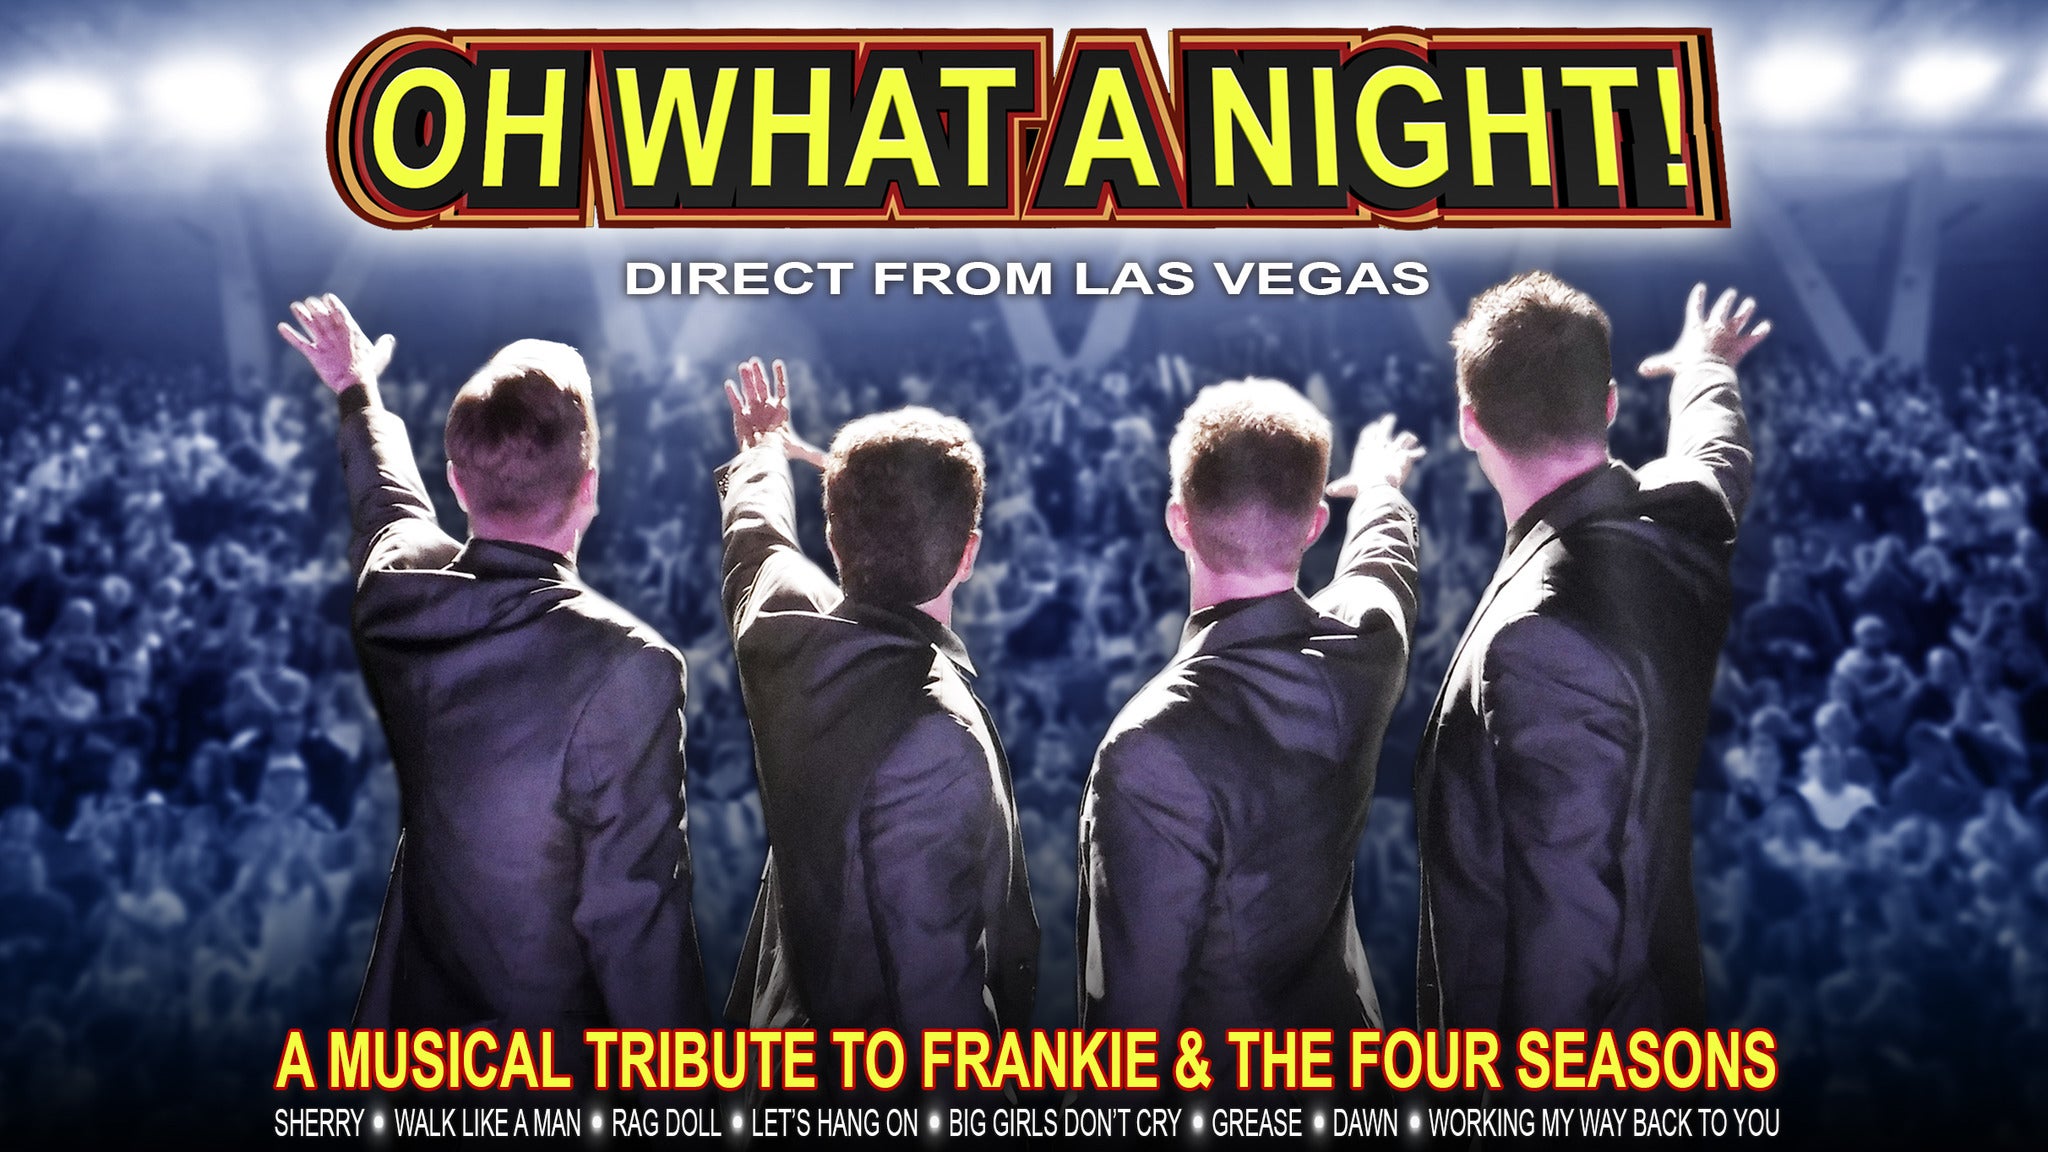 Oh What A Night! A Musical Tribute To Frankie Valli and the Four Seasons presale information on freepresalepasswords.com